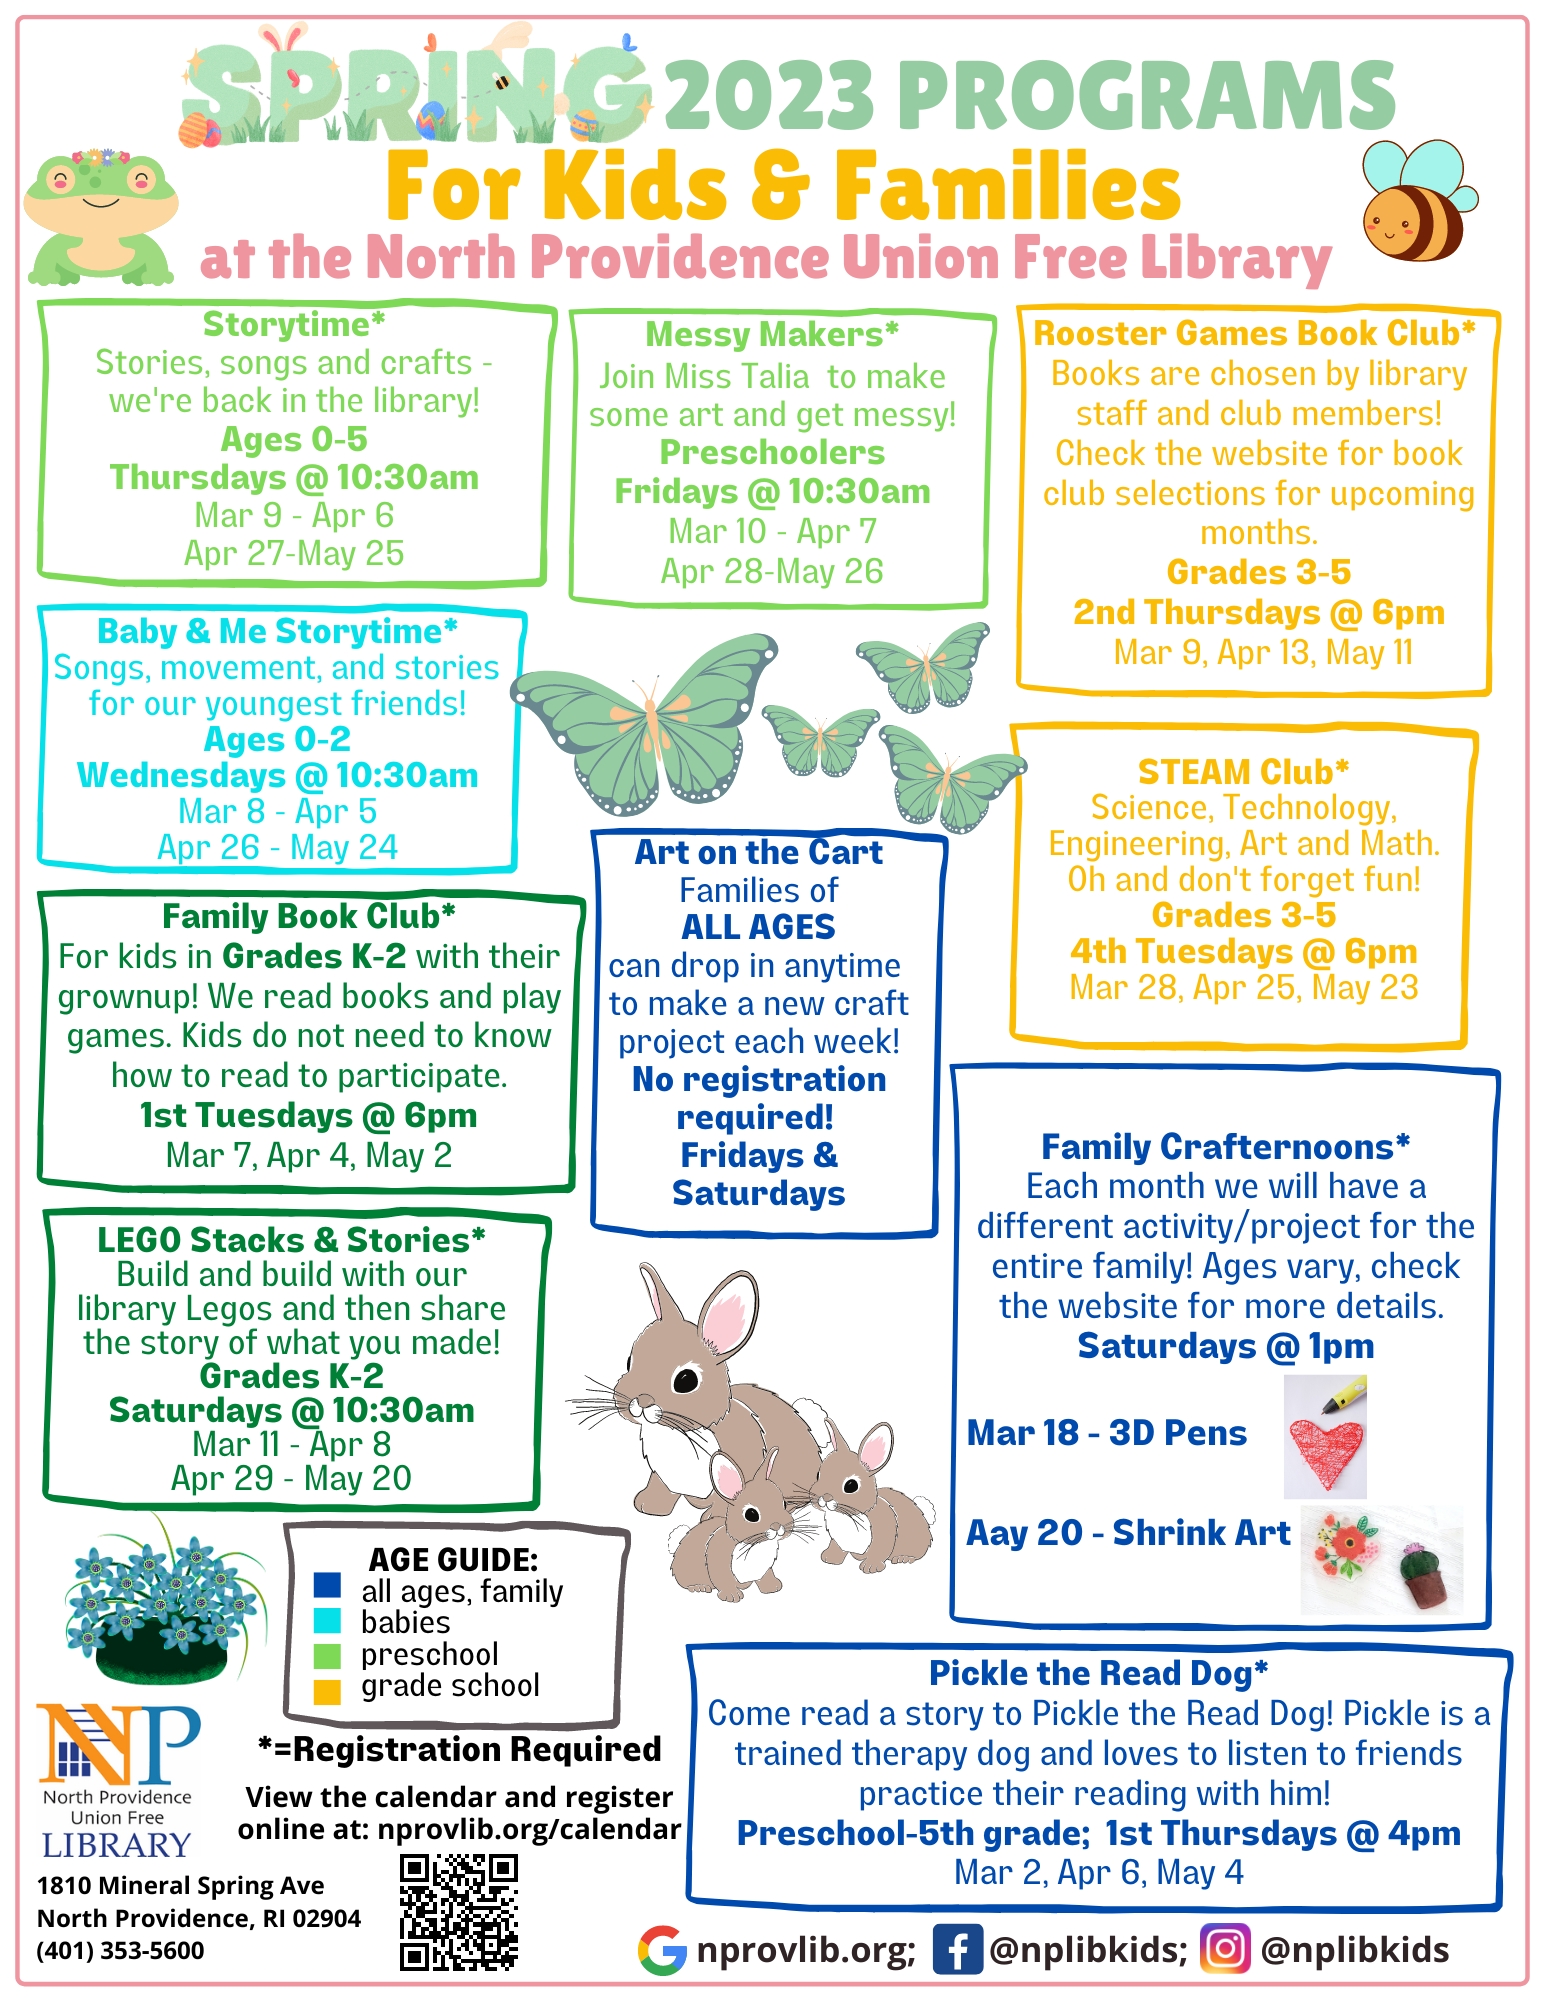 Flyer for Spring 2023 programs for kids and families